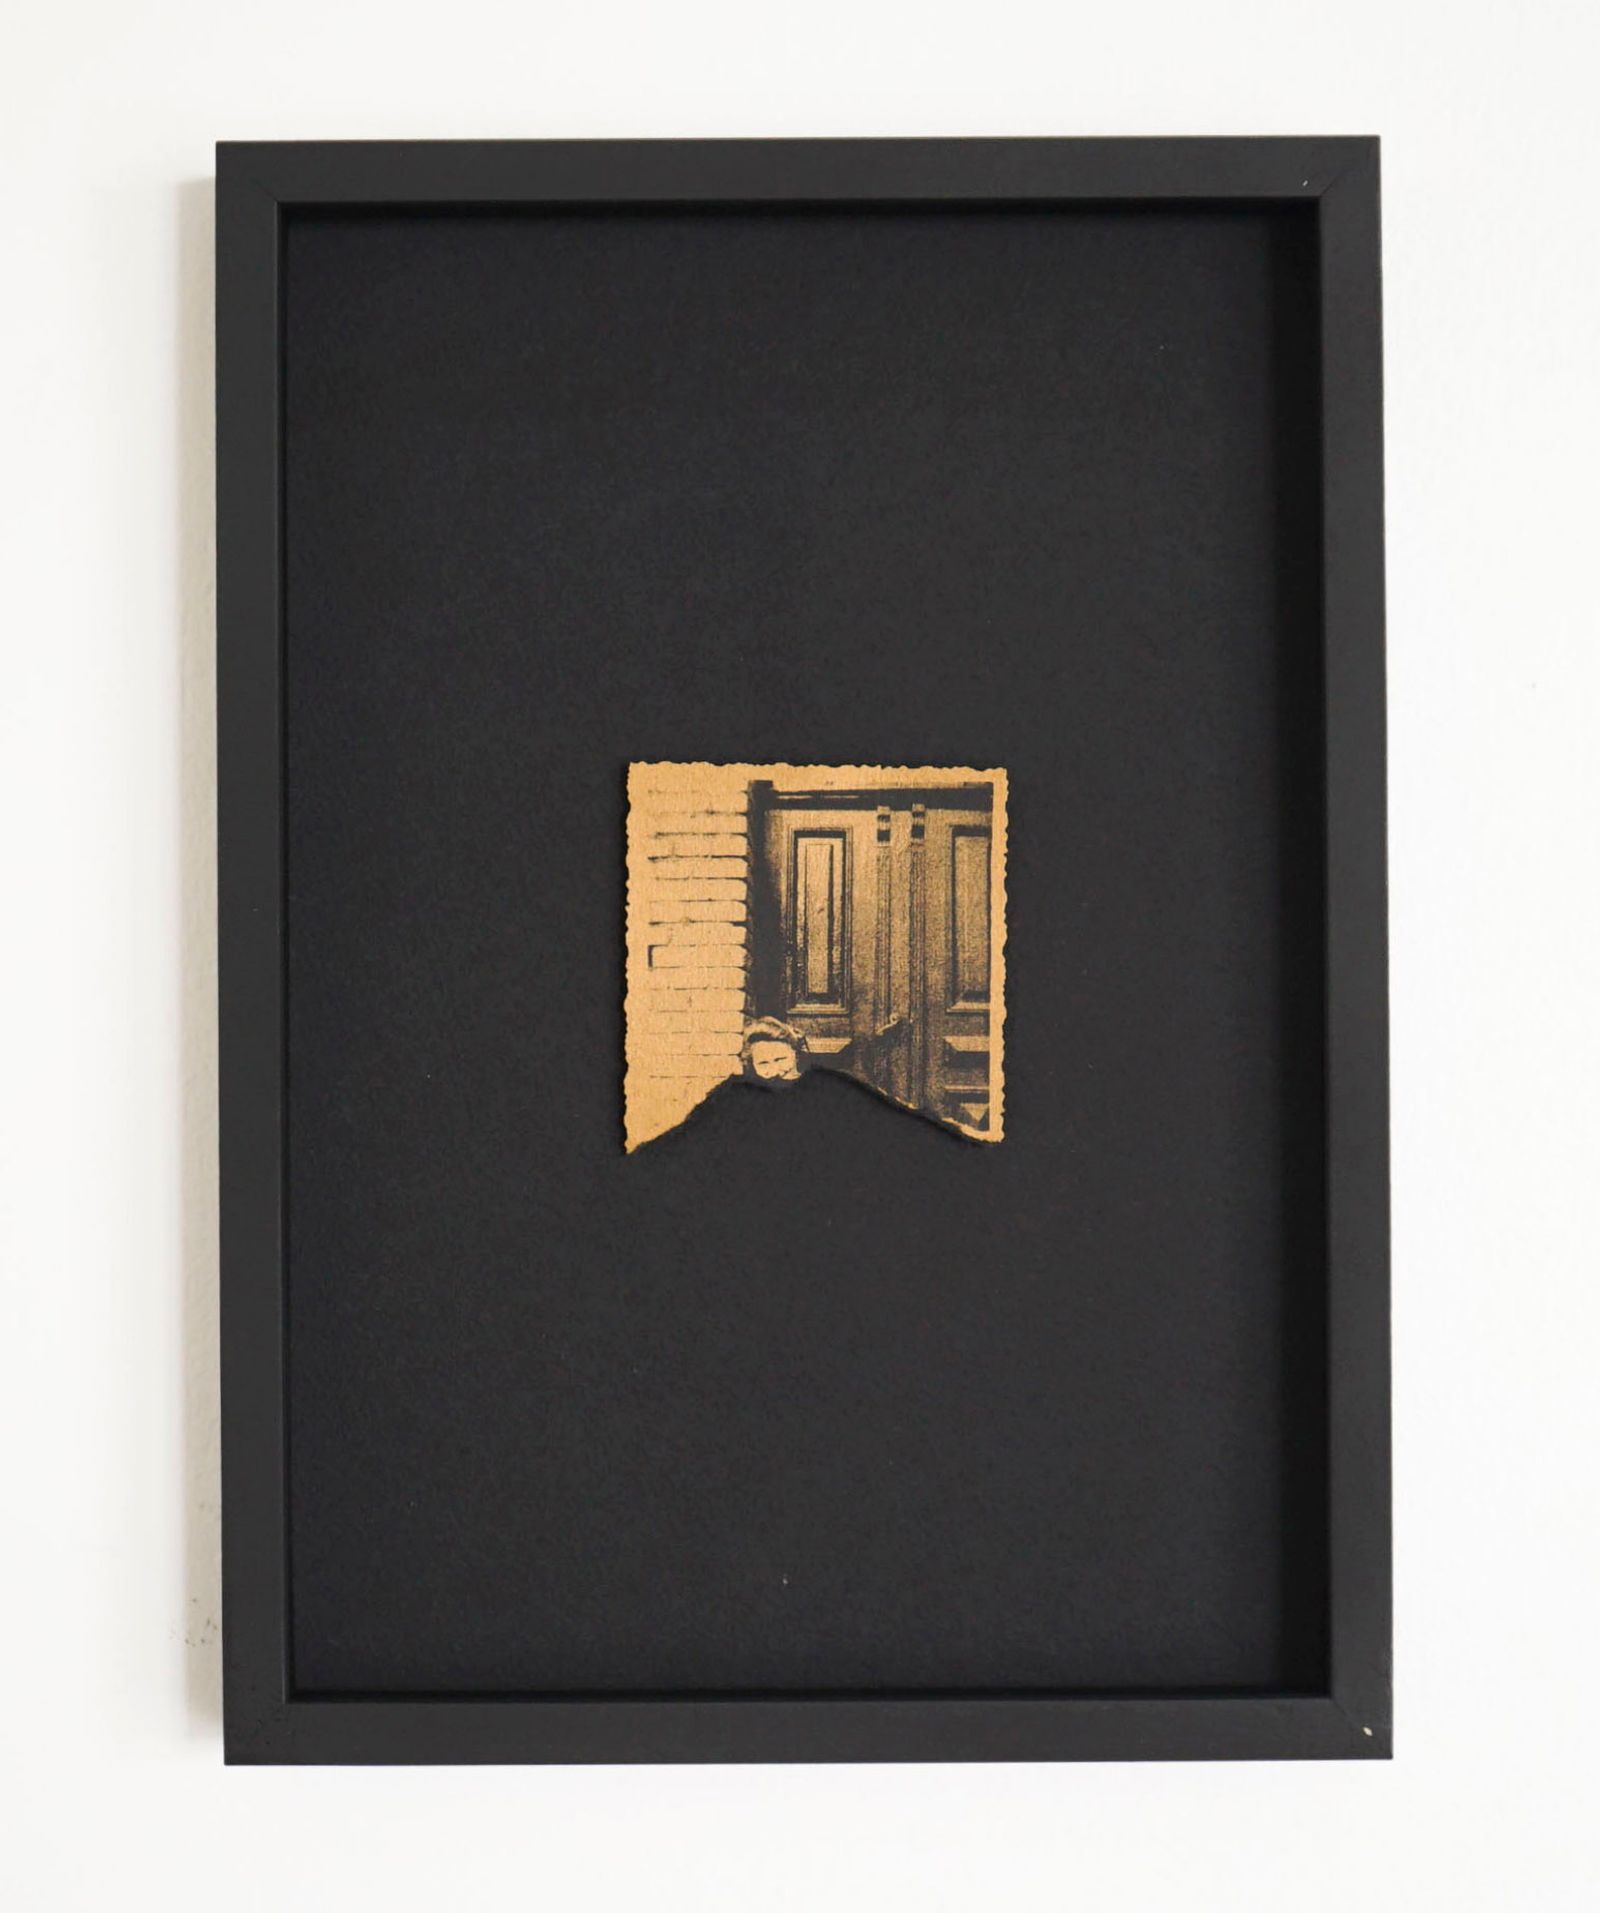 © Tomasz Laczny - Riso print, golden ink , 10x6cm (without frame), on black 60g Hahnemuhle paper